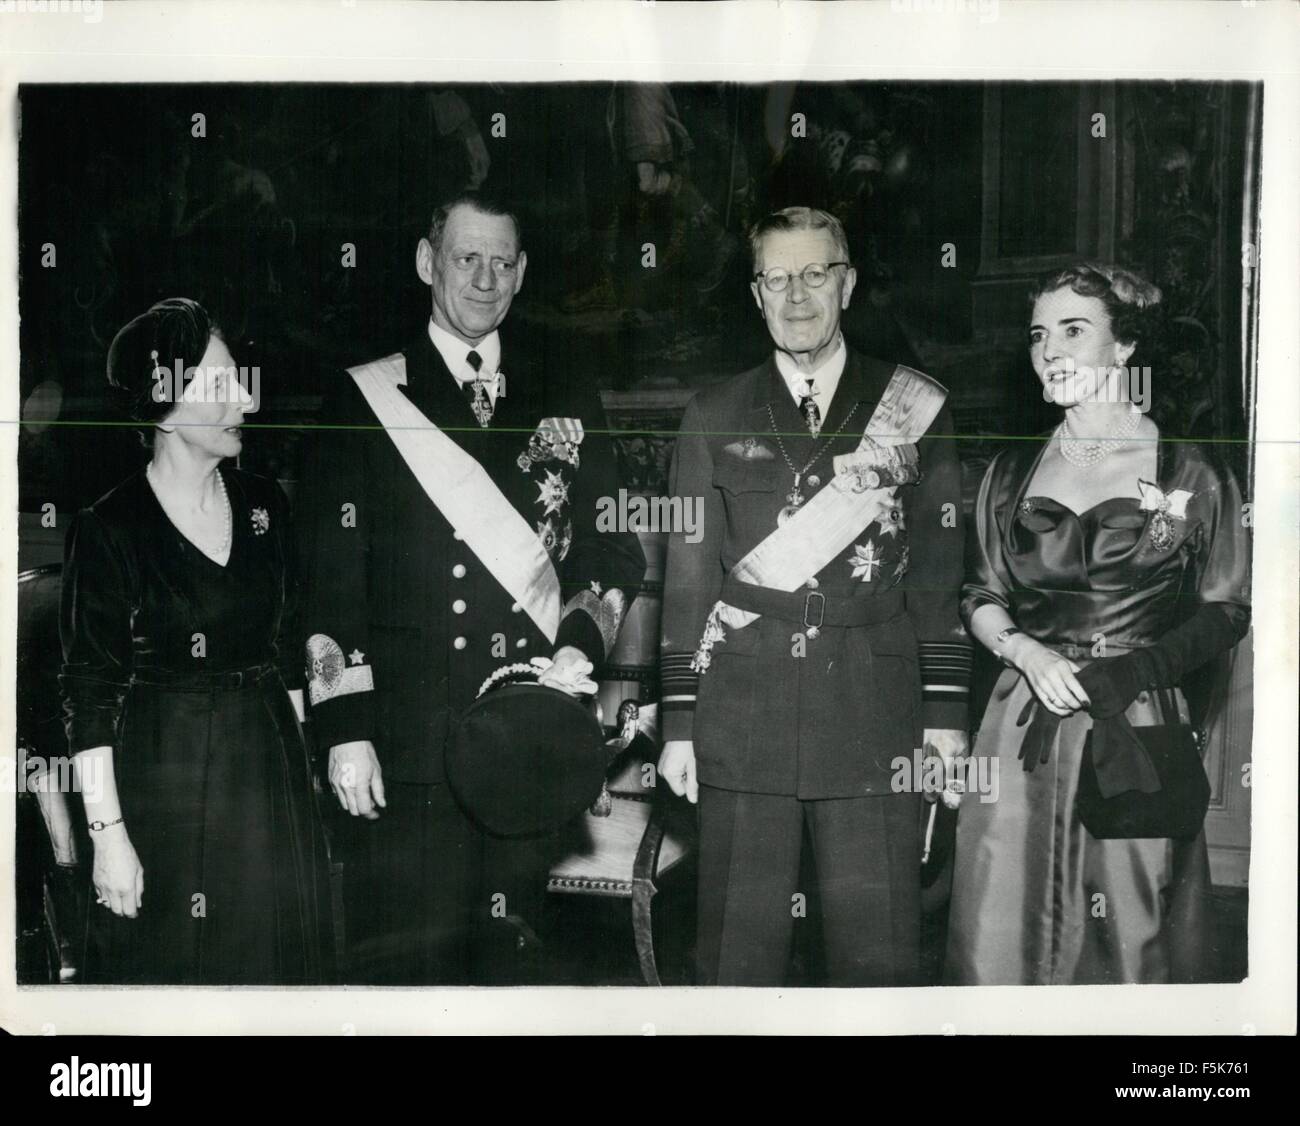 1952 - King and Queen of Denmark on official visit to Sweden.: King Frederick and Queen Ingrid of Denmark, yesterday arrived in Stockholm at the start of a three days official visit, as guests of the Swedish King and Queen. Outside Stockholm Central station, Queen Ingrid and Queen Louise were rocked in the seats of a stationary carriage when the lead horse reared up and thrashed windly around. Photo shows (L-R). Queen Louise of Sweden, King Frederick of Denmark, King Gustav Adolf and Queen Ingrid of Denmark seen together yesterday. © Keystone Pictures USA/ZUMAPRESS.com/Alamy Live News Stock Photo